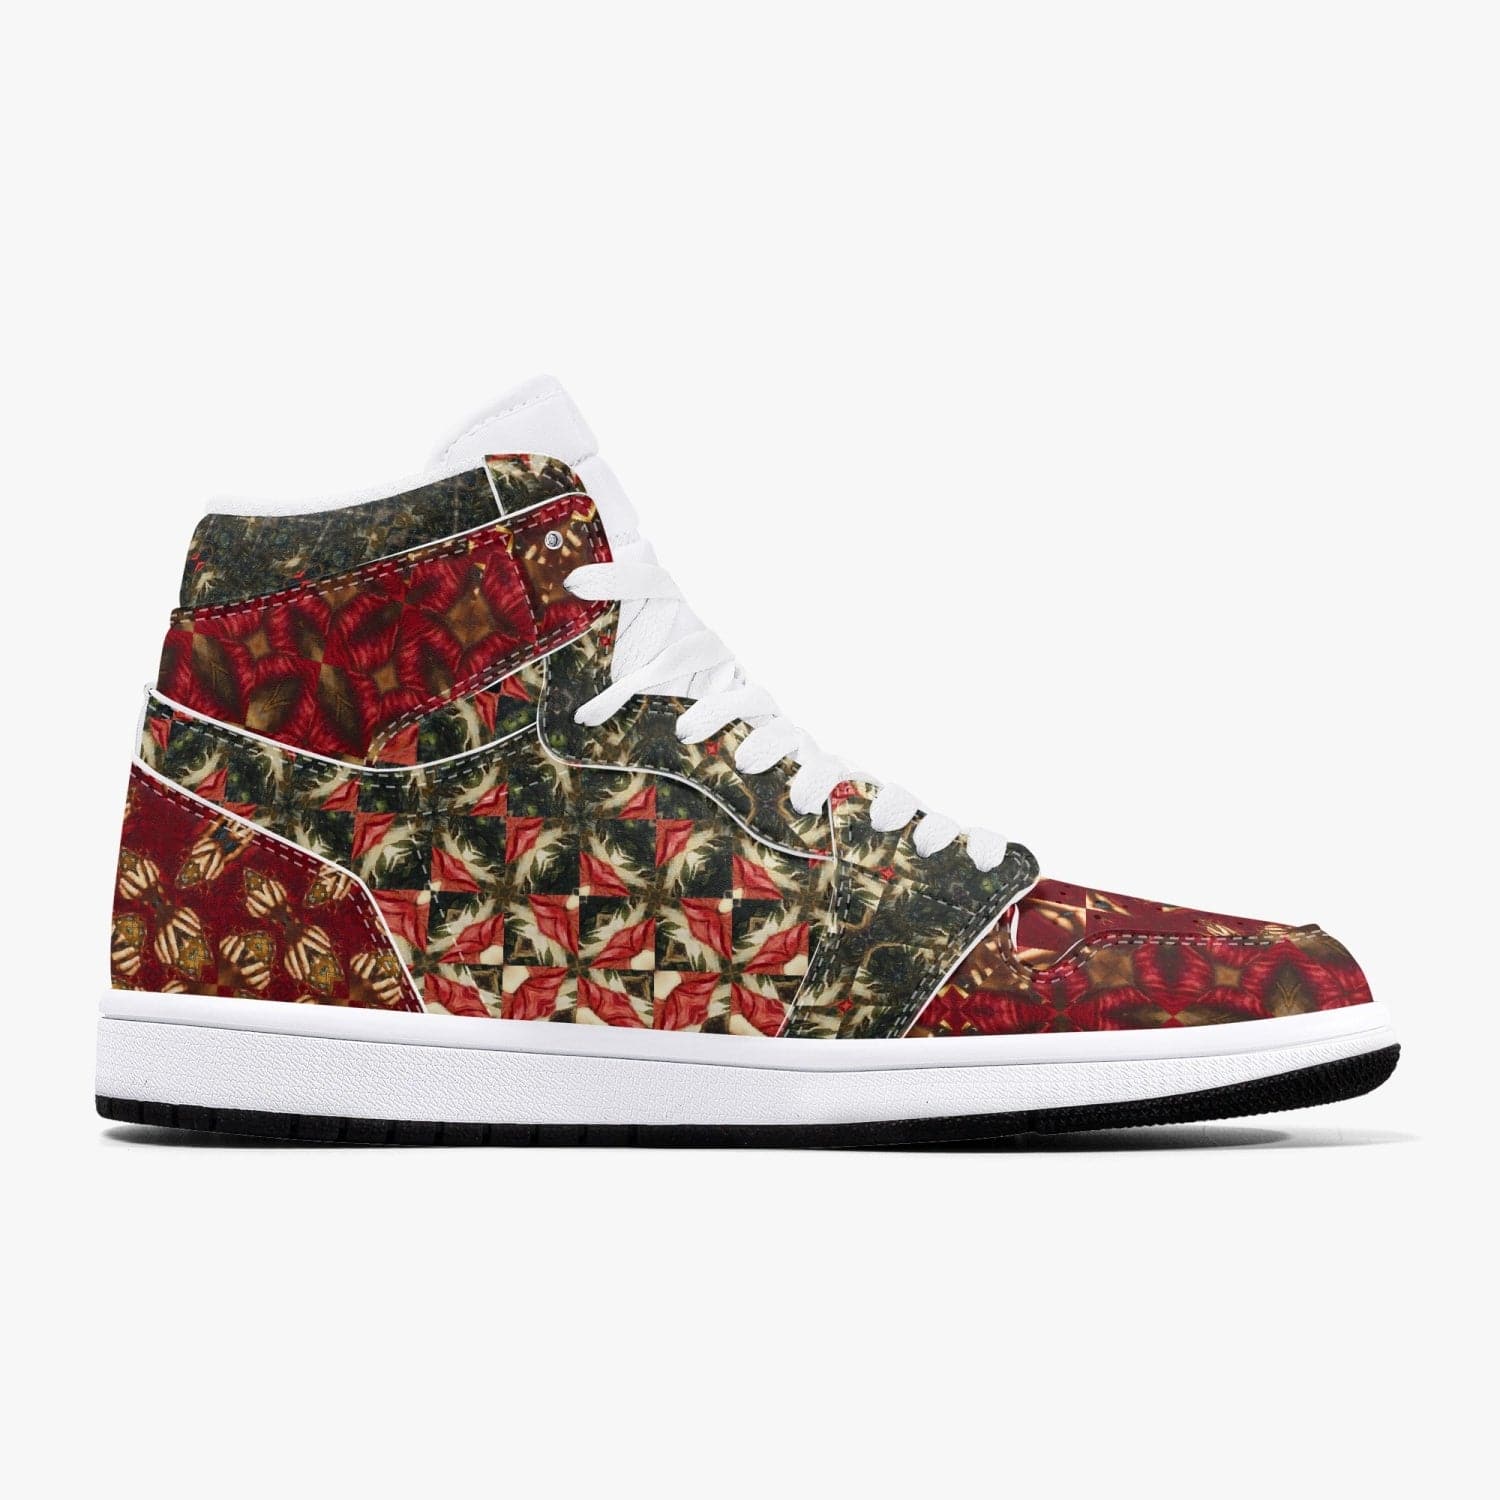 Red with yellow patterned Trendy design 2022 New Black High-Top Leather Sneakers, by Sensus Studio Design